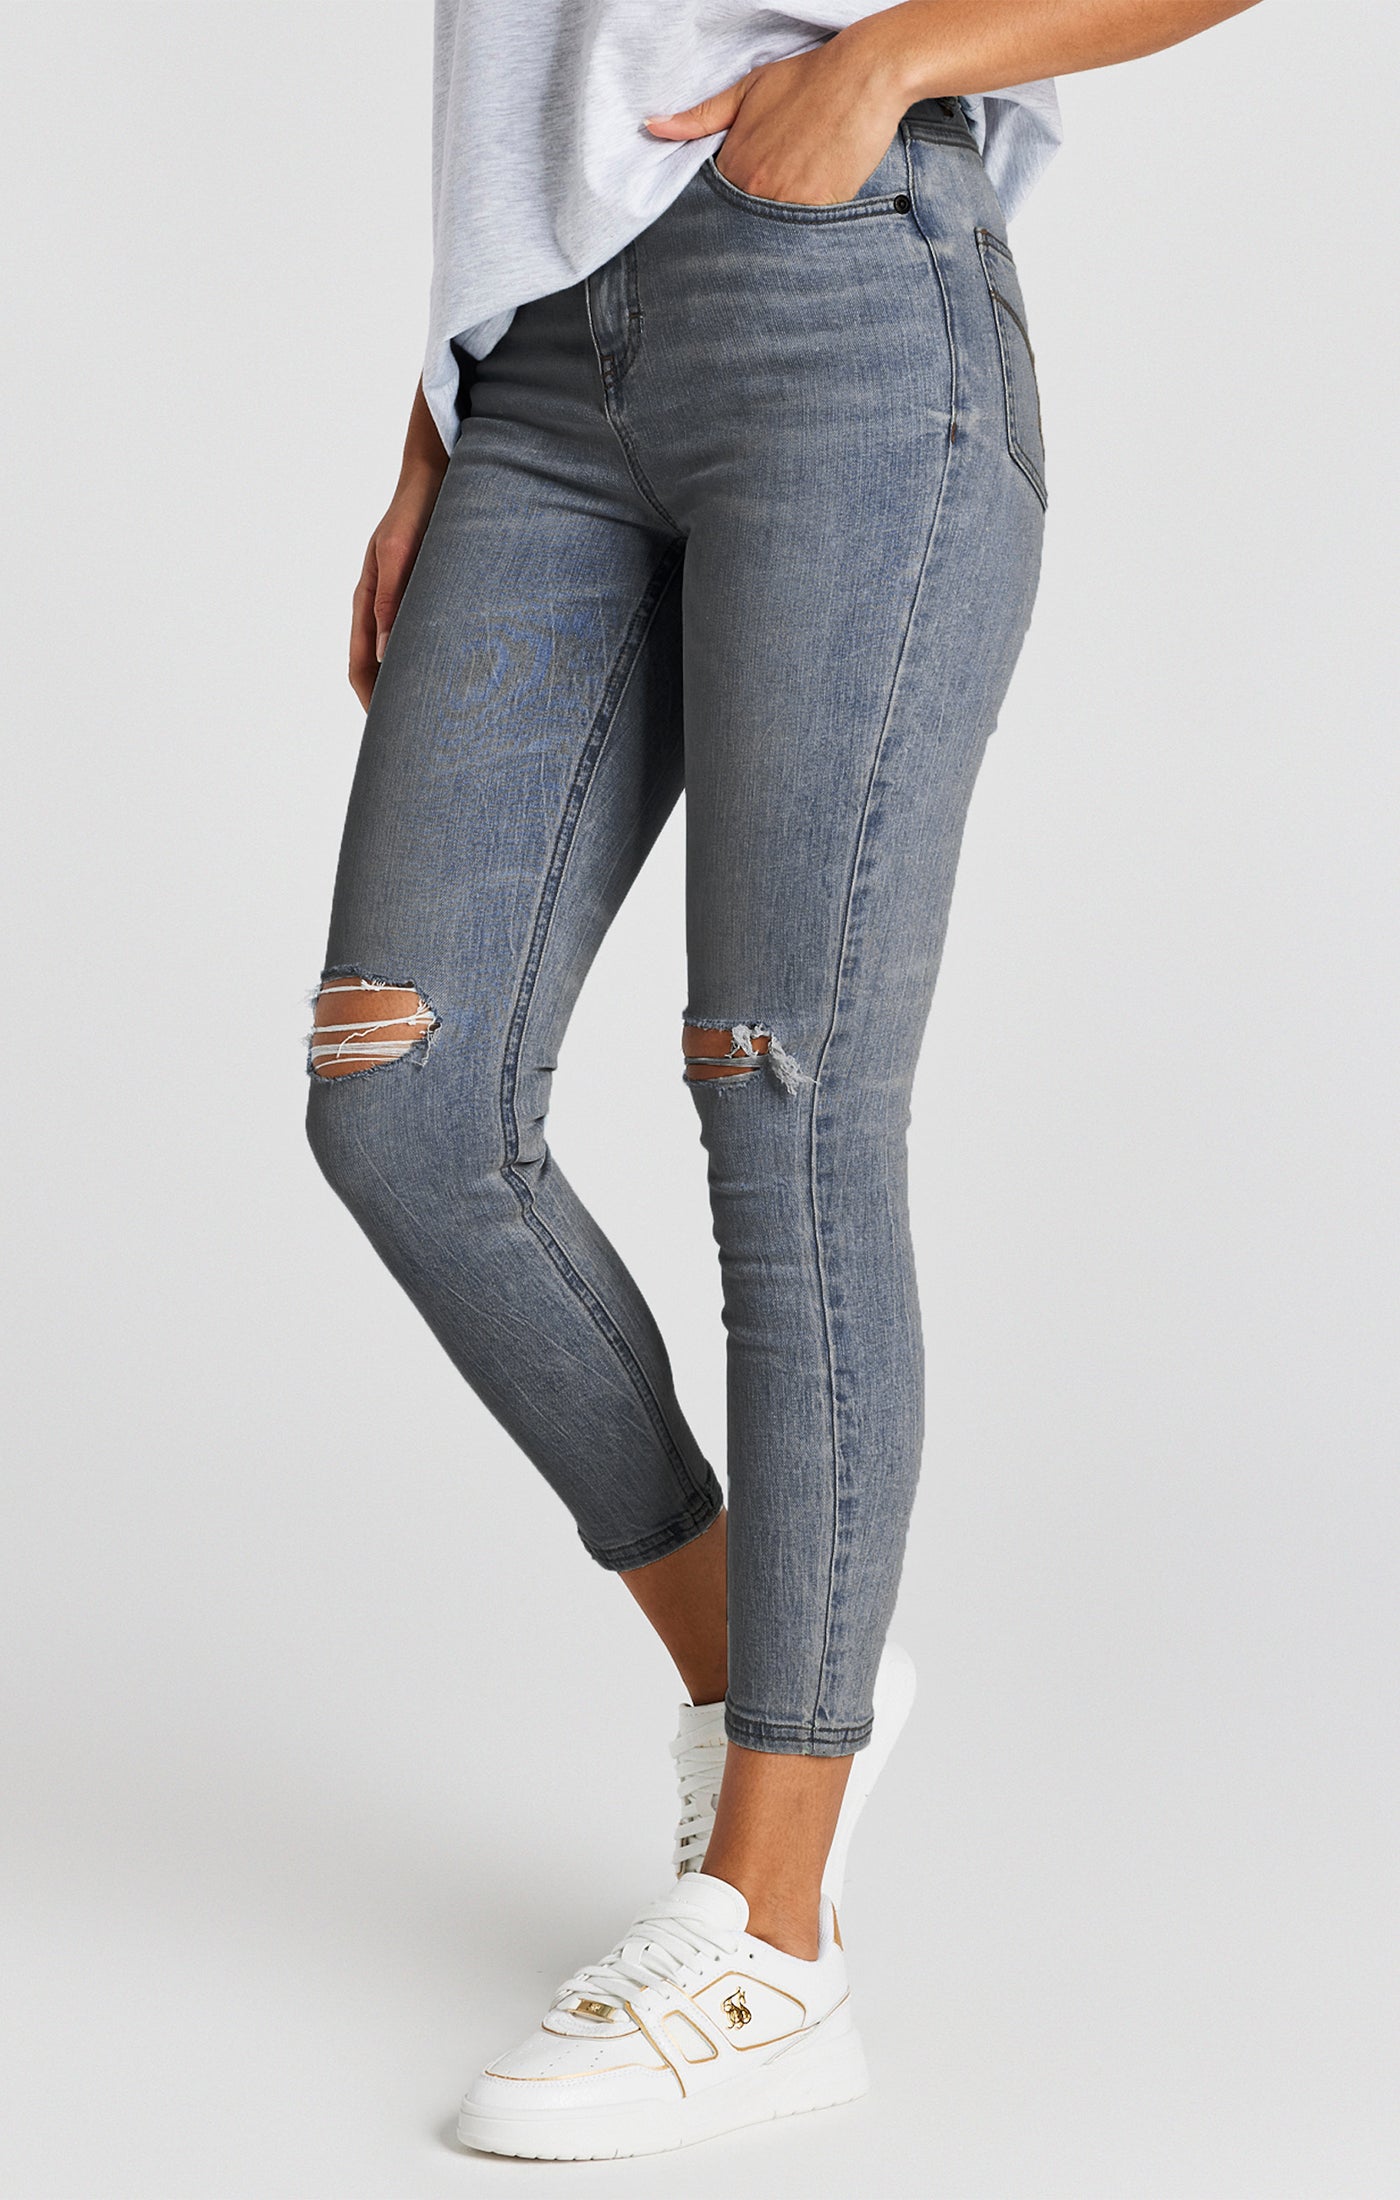 Load image into Gallery viewer, Light Blue Wash Distressed Denim Jean